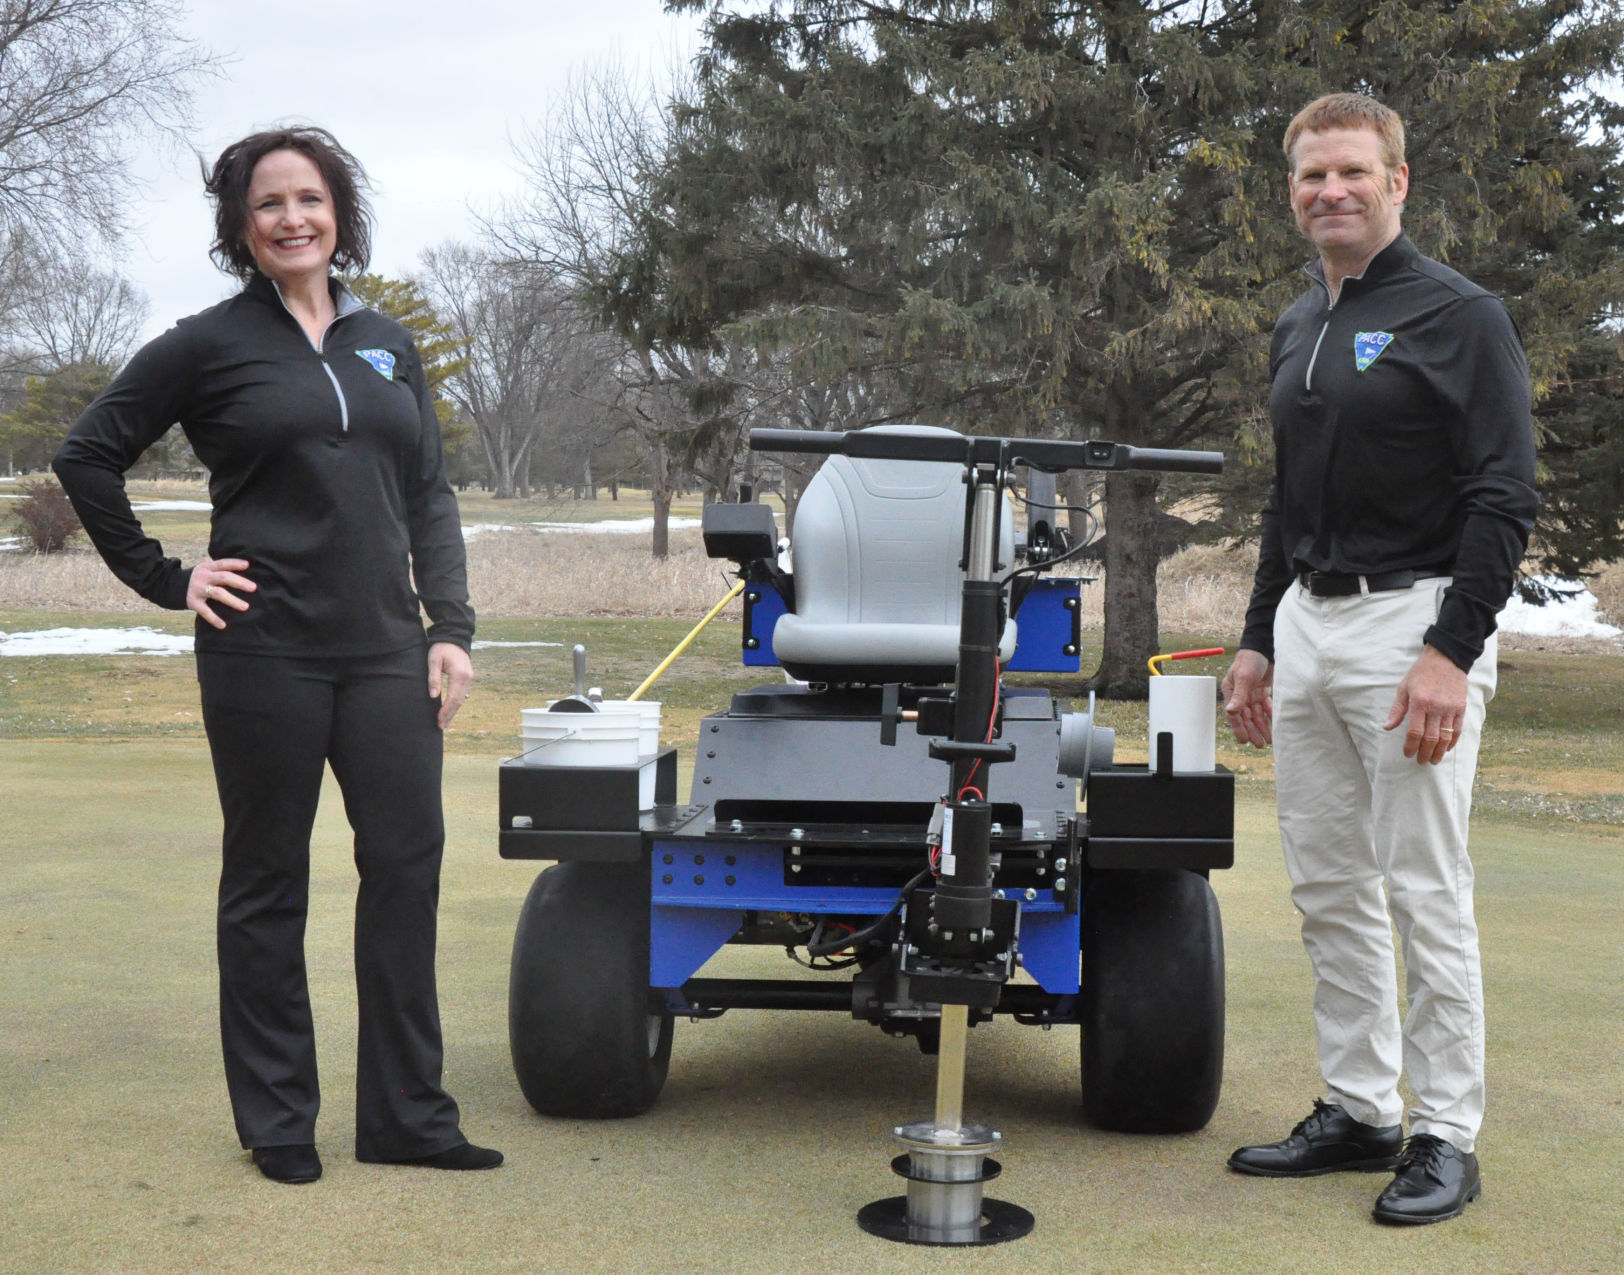 The PACC is a cost cutter for golf courses, Hutchinson Leader